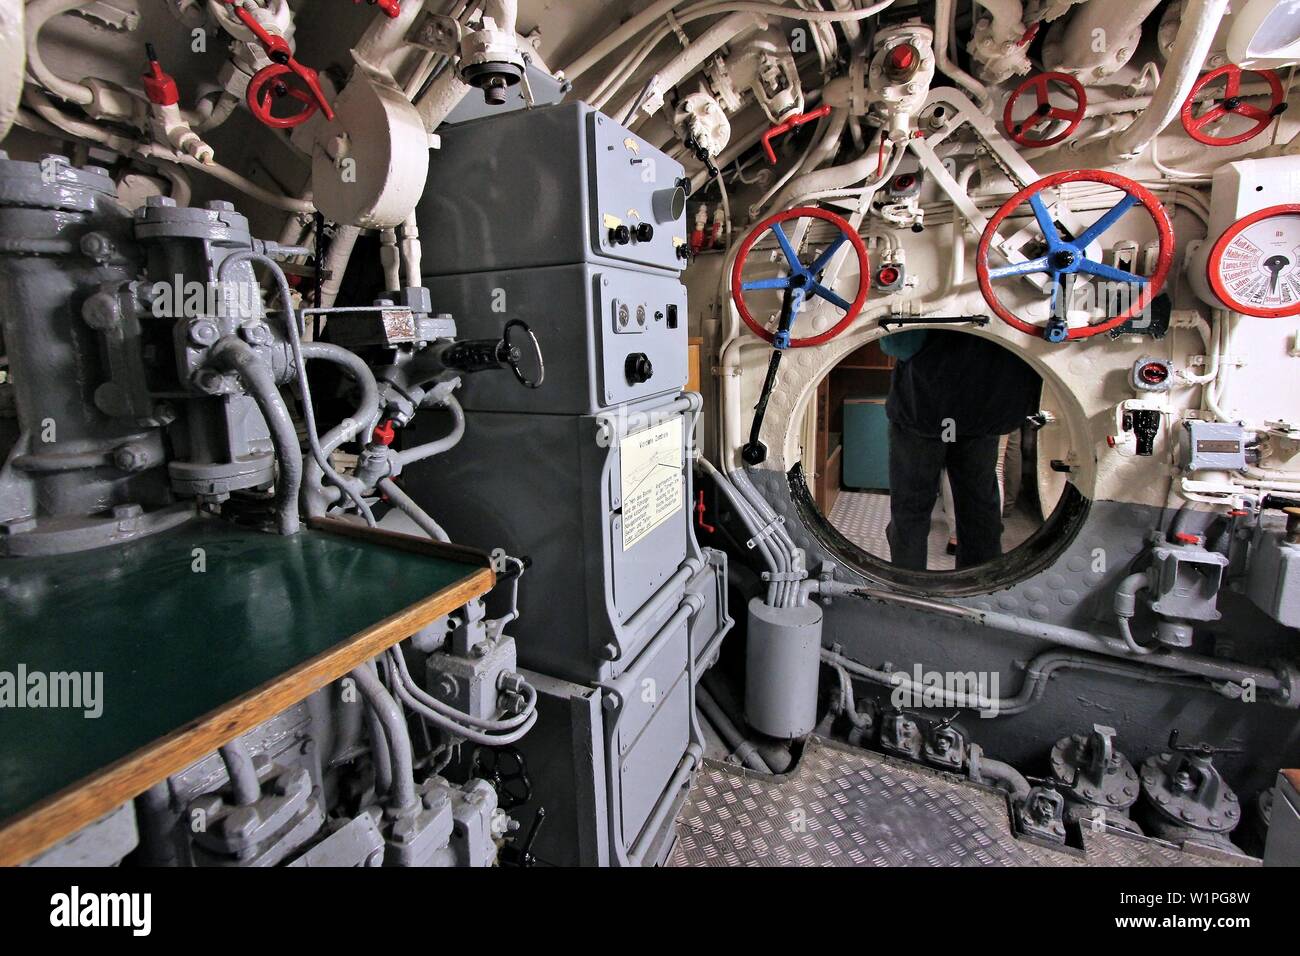 LABOE, GERMANY - AUGUST 30, 2014: Interior of German submarine U-995 (museum ship) in Laboe. It is the only surviving Type VII submarine in the world. Stock Photo